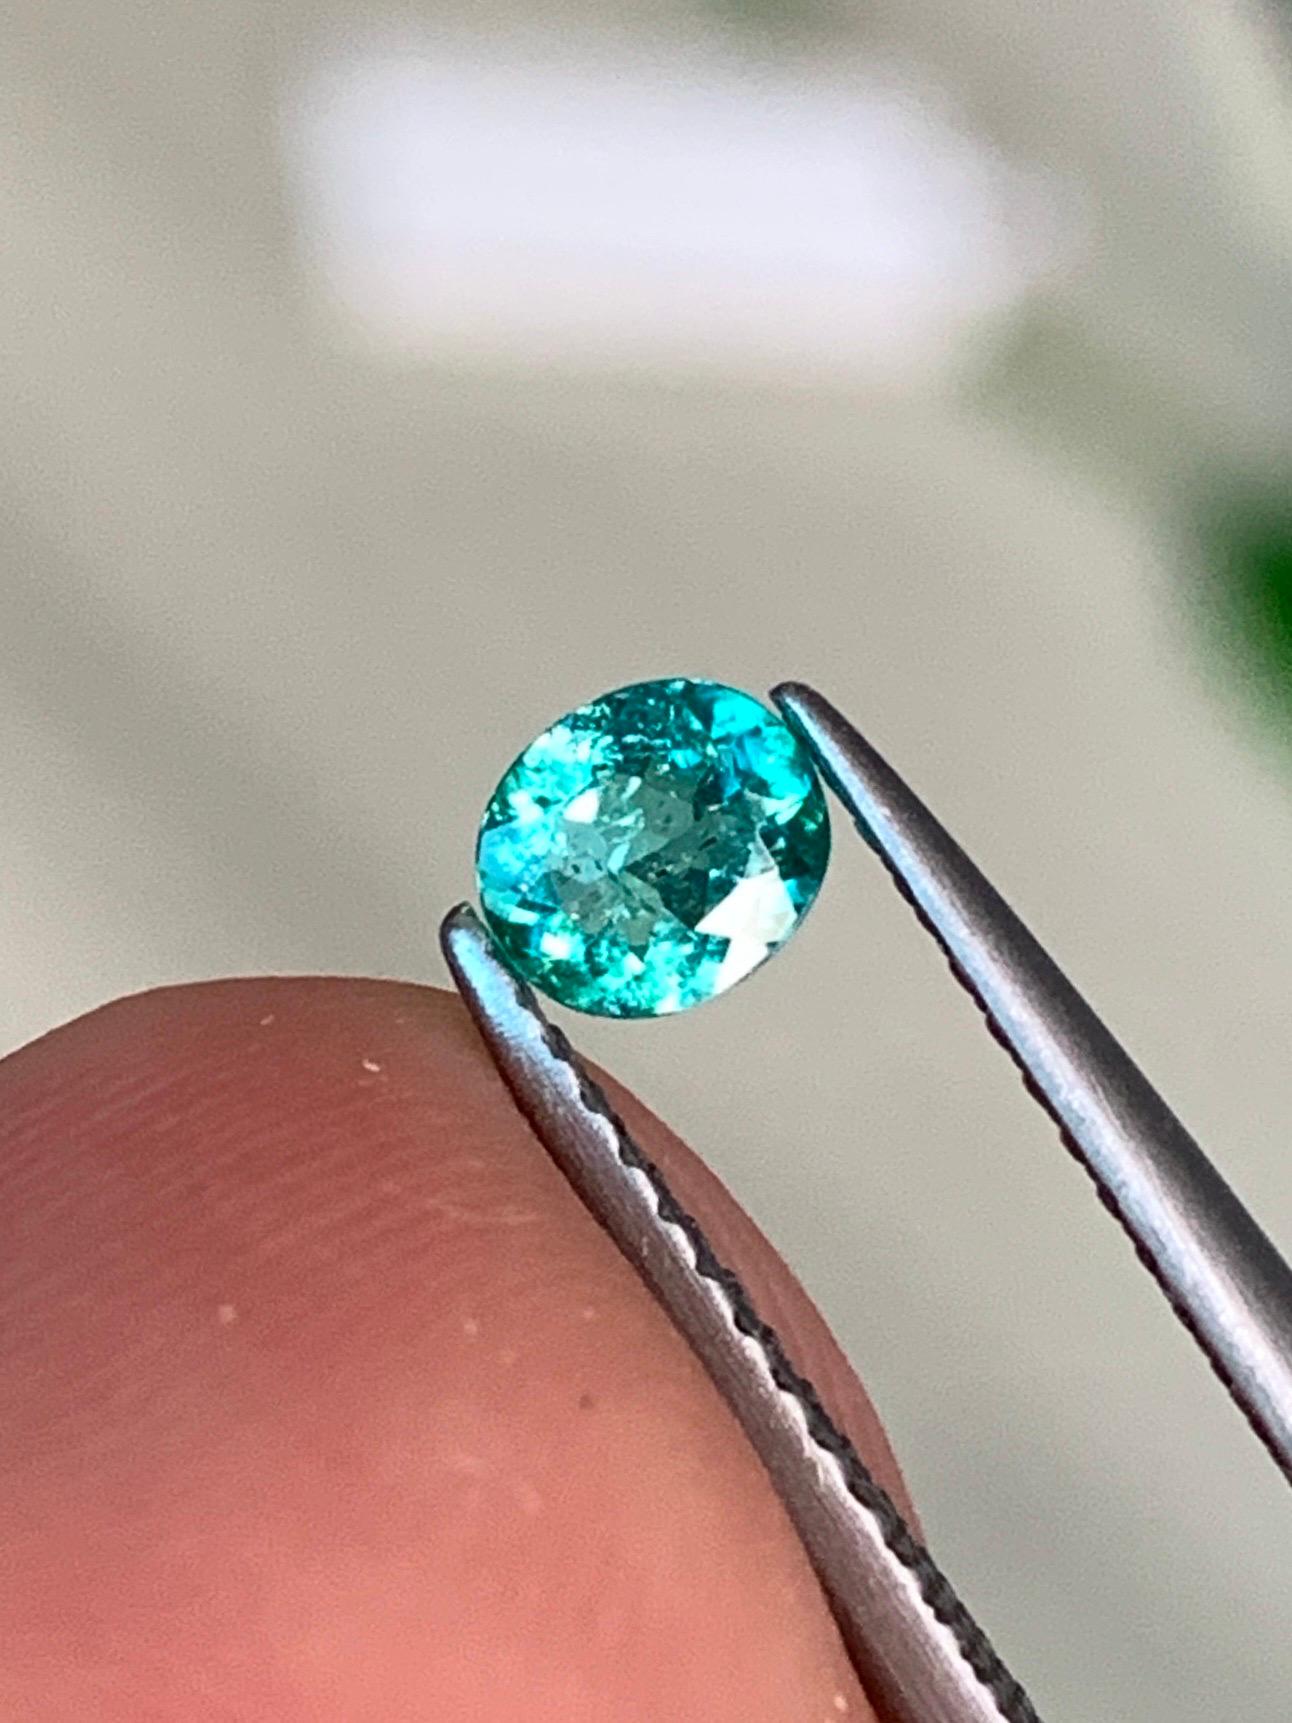 ITEM DESCRIPTION: 
Gem type : Natural Paraiba Tourmaline
Origin: Brazil
Treatment: Natural
Color: Blue-Green
shape: Oval
Size: 0.38 Carats


Paraíba tourmaline is one of the most coveted and valuable gemstones in the world, distinguished by its